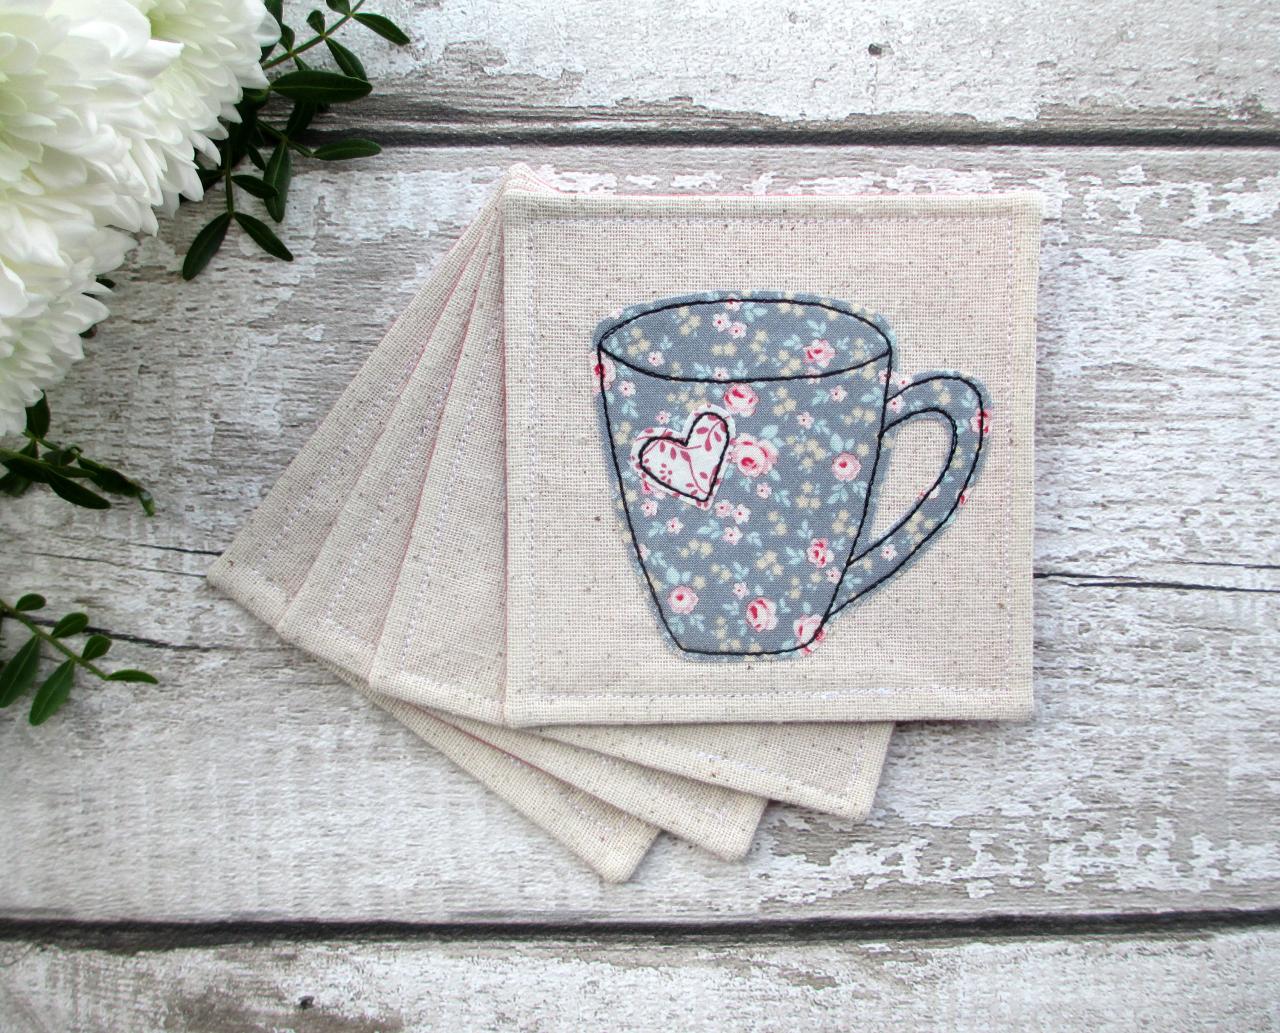 Coaster Set, Home Gift For A Tea Or Coffee Lover